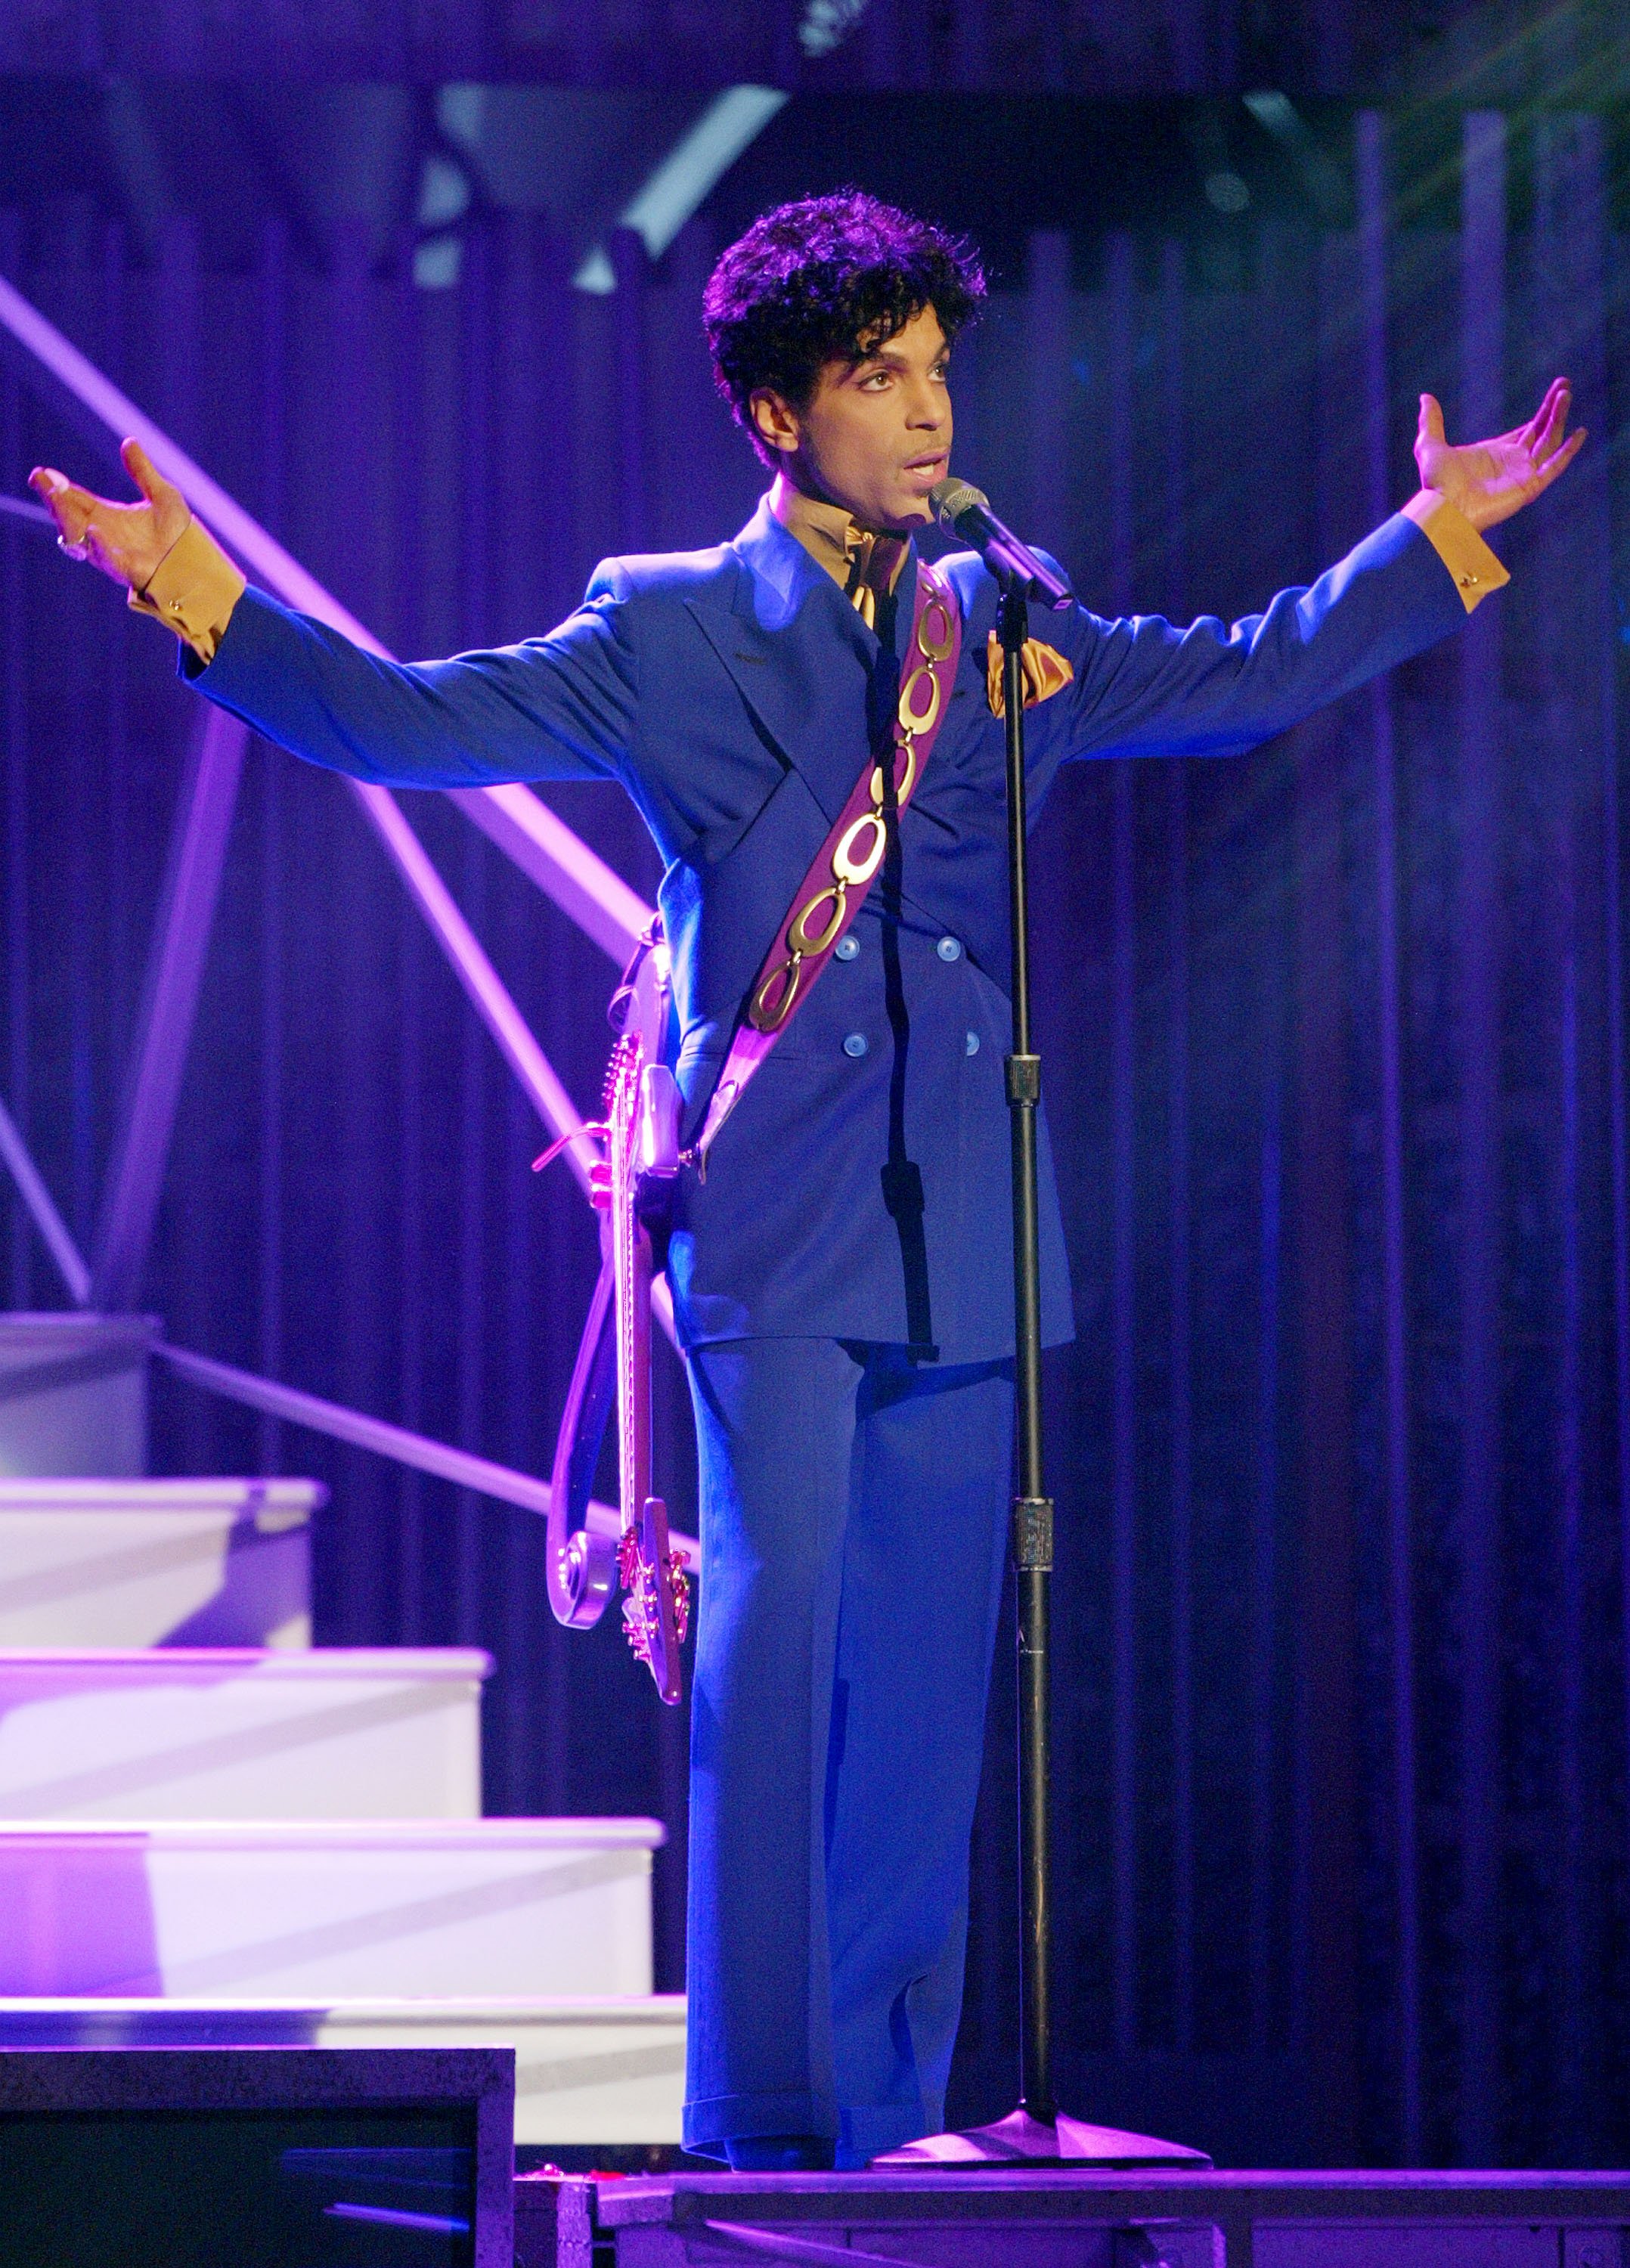 Grammy and Oscar-winning recording artist Prince performs the song "Purple Rain" at the 46th Annual Grammy Awards held at the Staples Center on February 8, 2004 in Los Angeles, California. | Photo: Getty Images